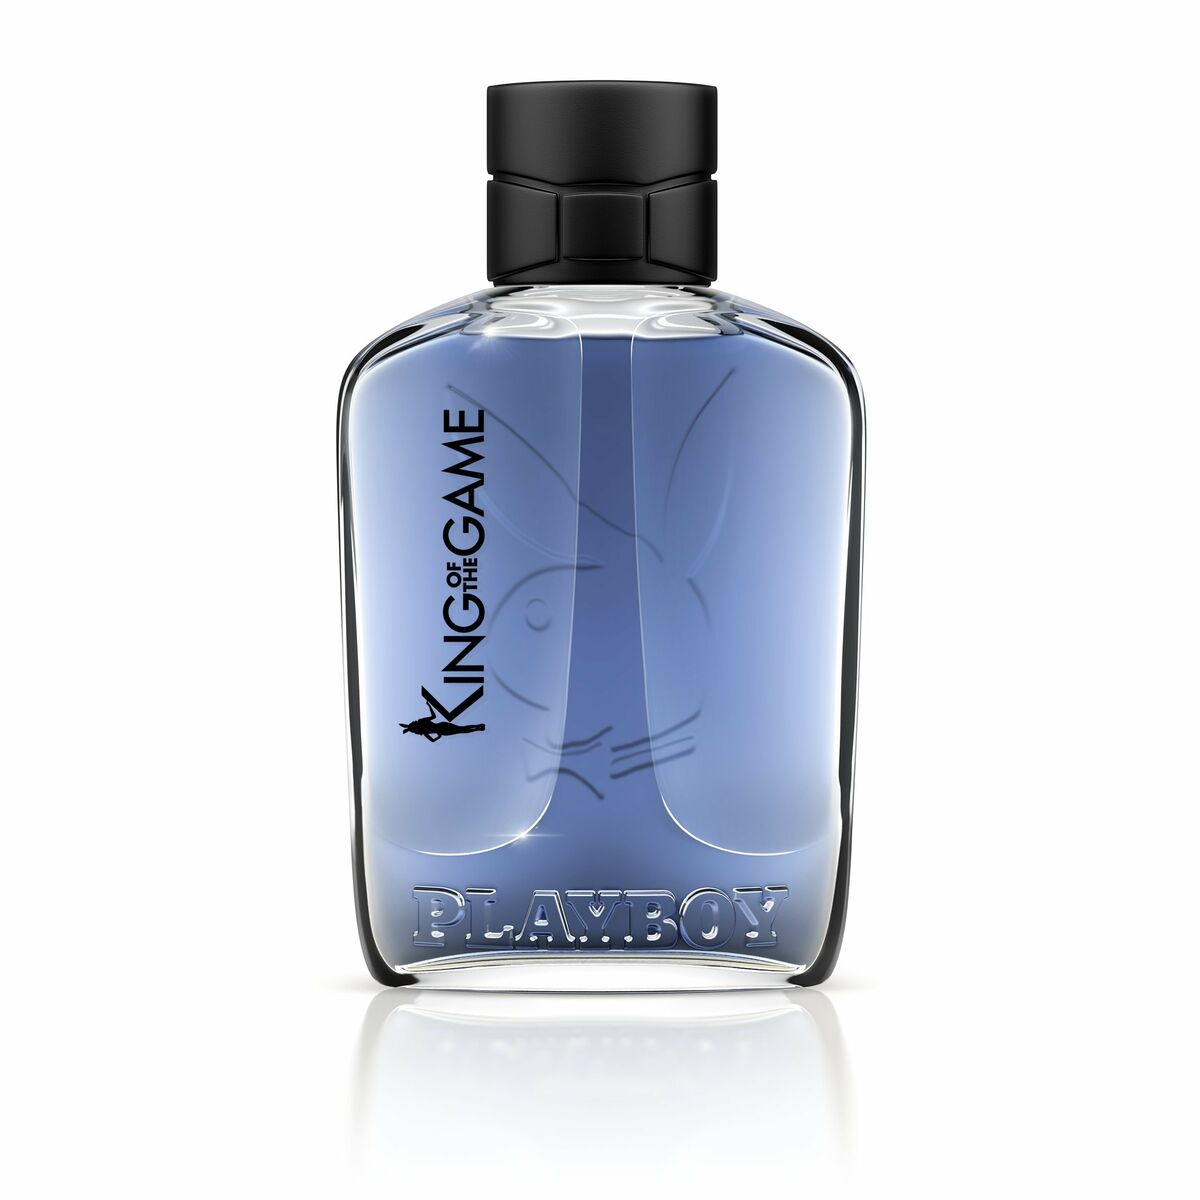 Parfum Homme Playboy EDT King of The Game 100 ml